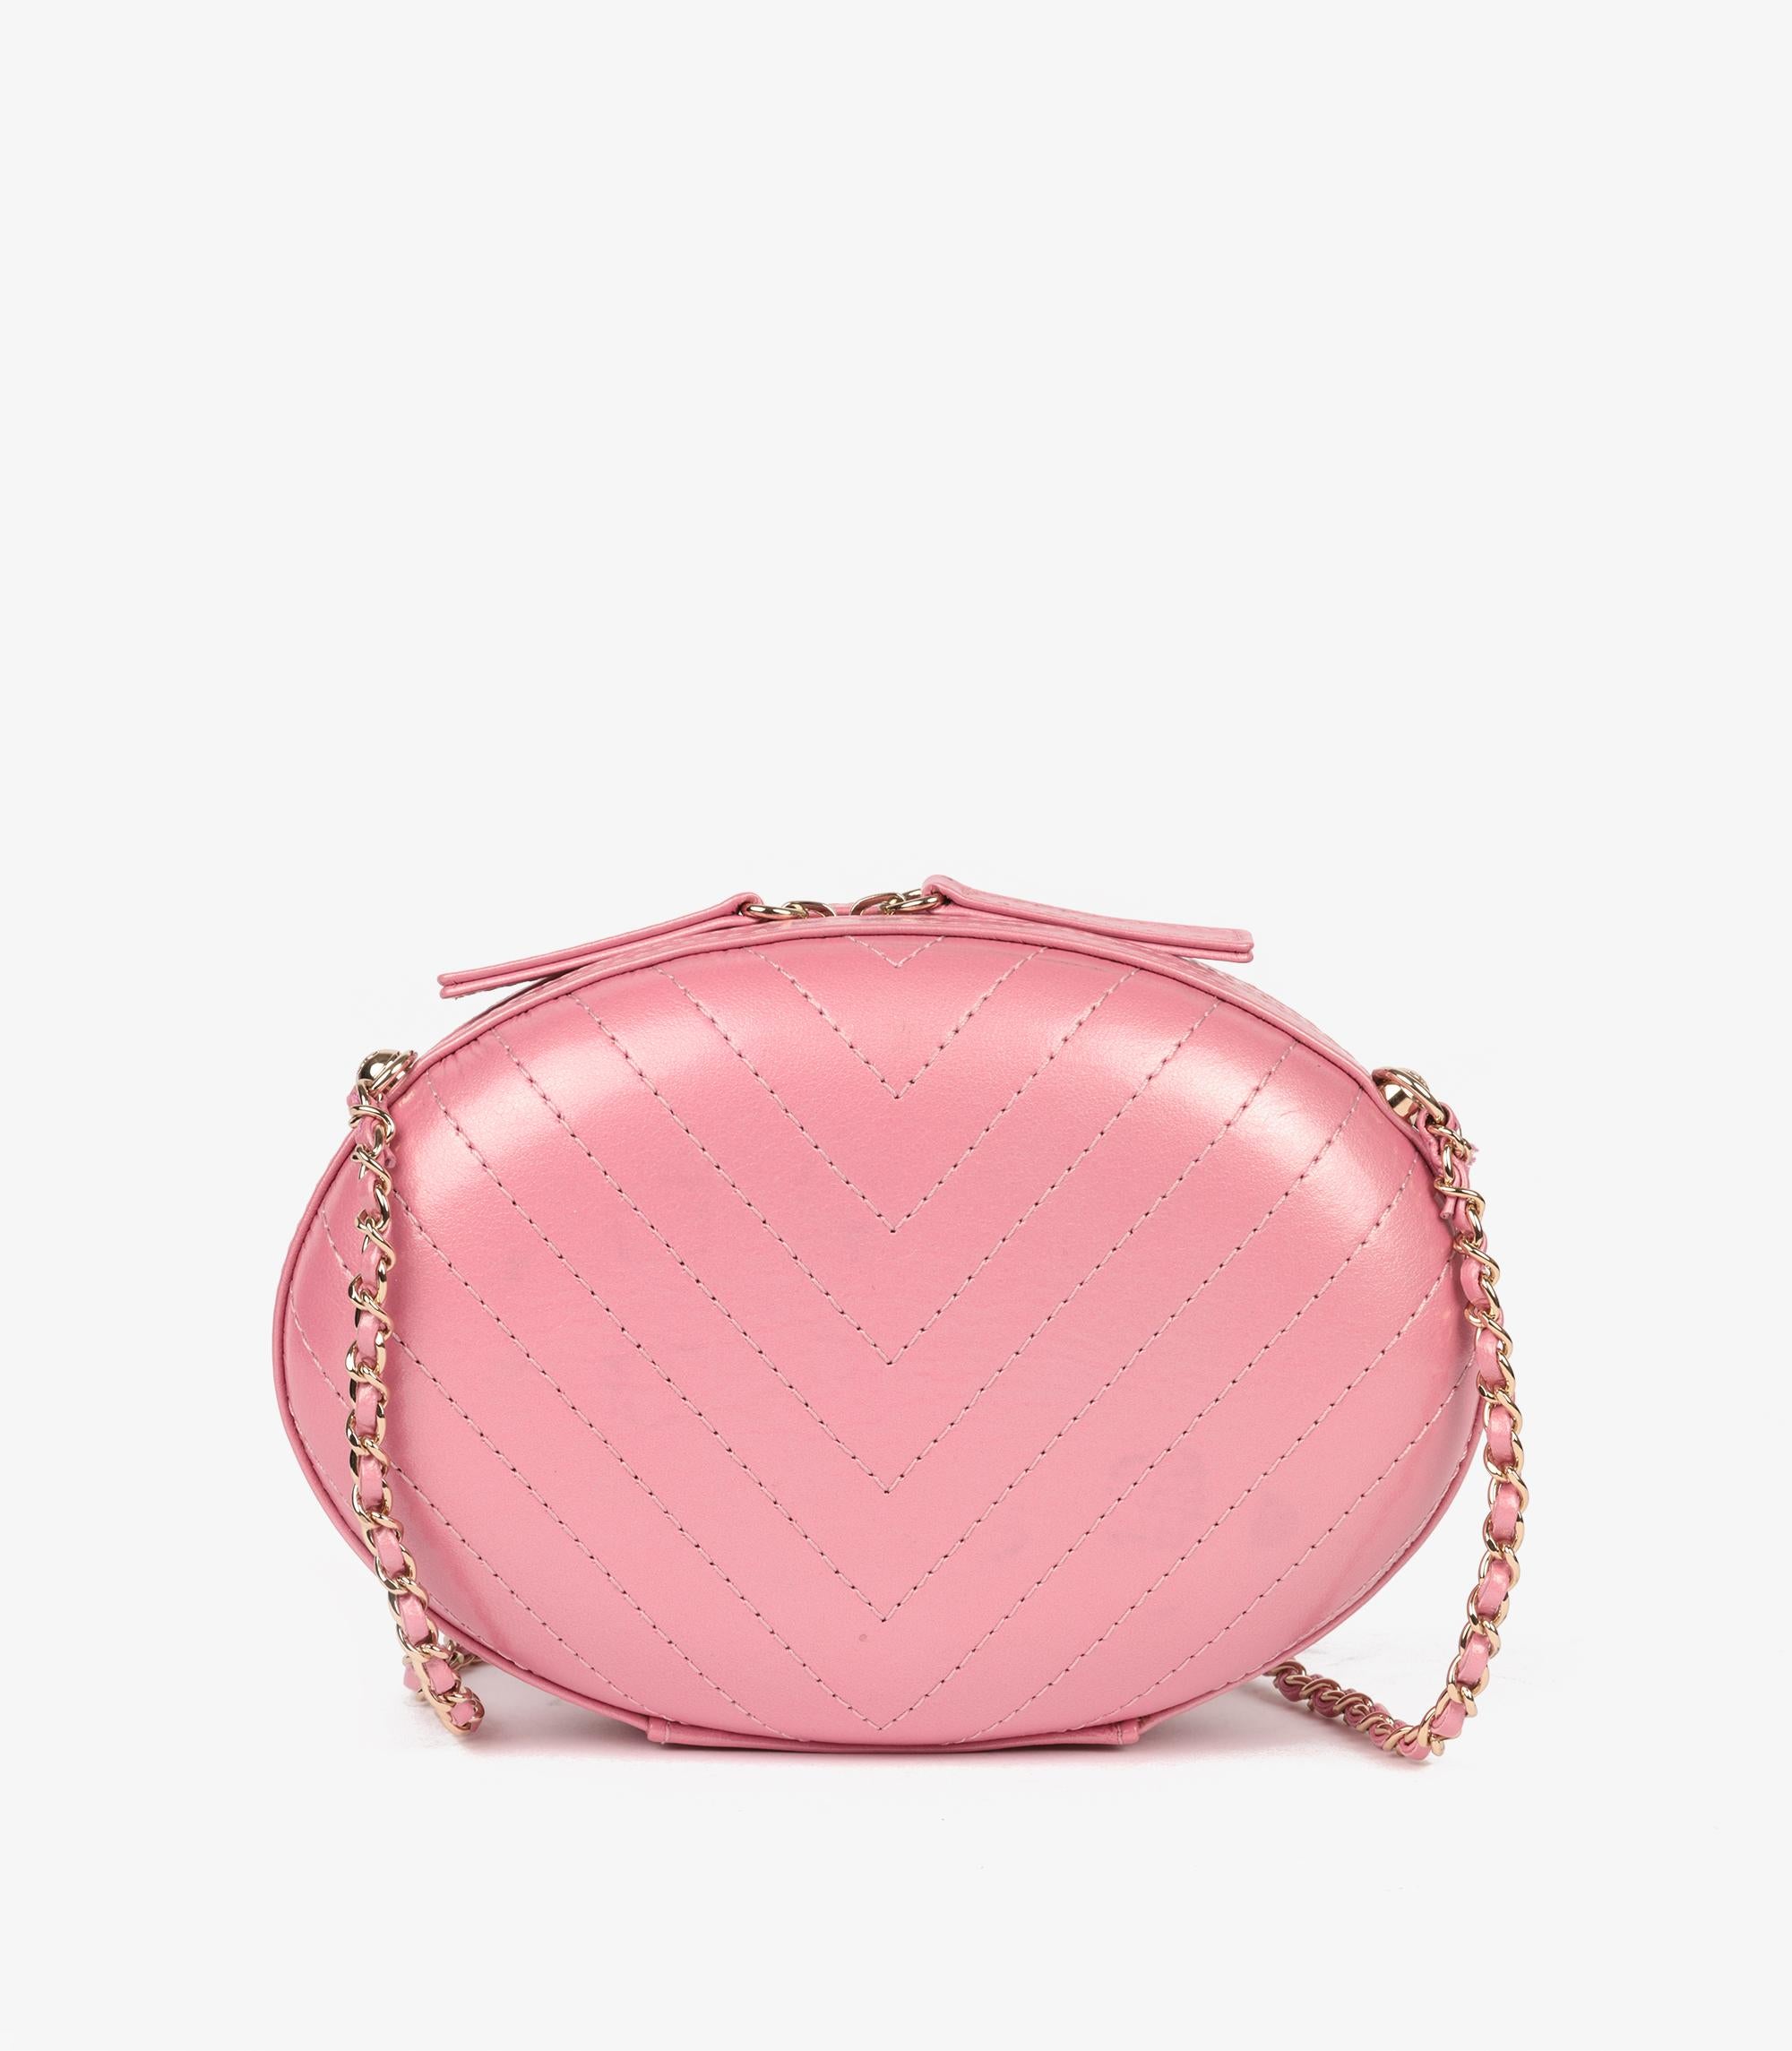 Chanel Pink Chevron Quilted Shiny Calfskin Leather La Pausa Classic Evening Bag For Sale 1